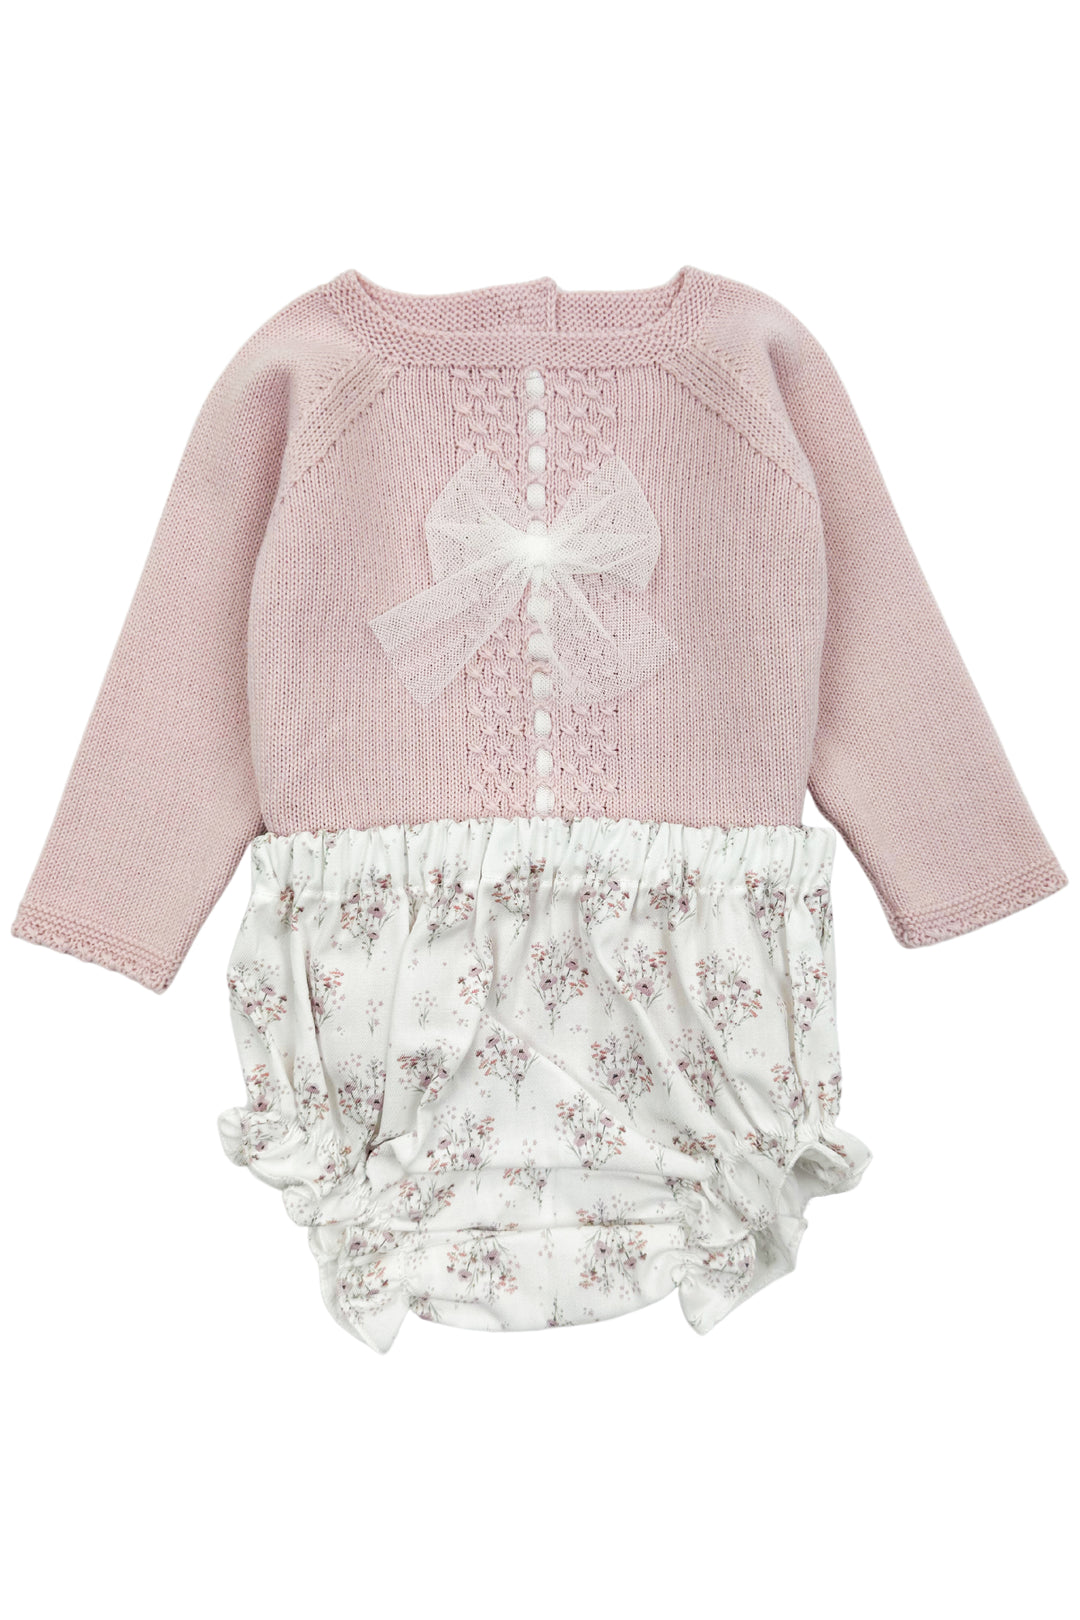 Granlei "Constance" Dusky Pink Knit Top & Floral Bloomers | Millie and John